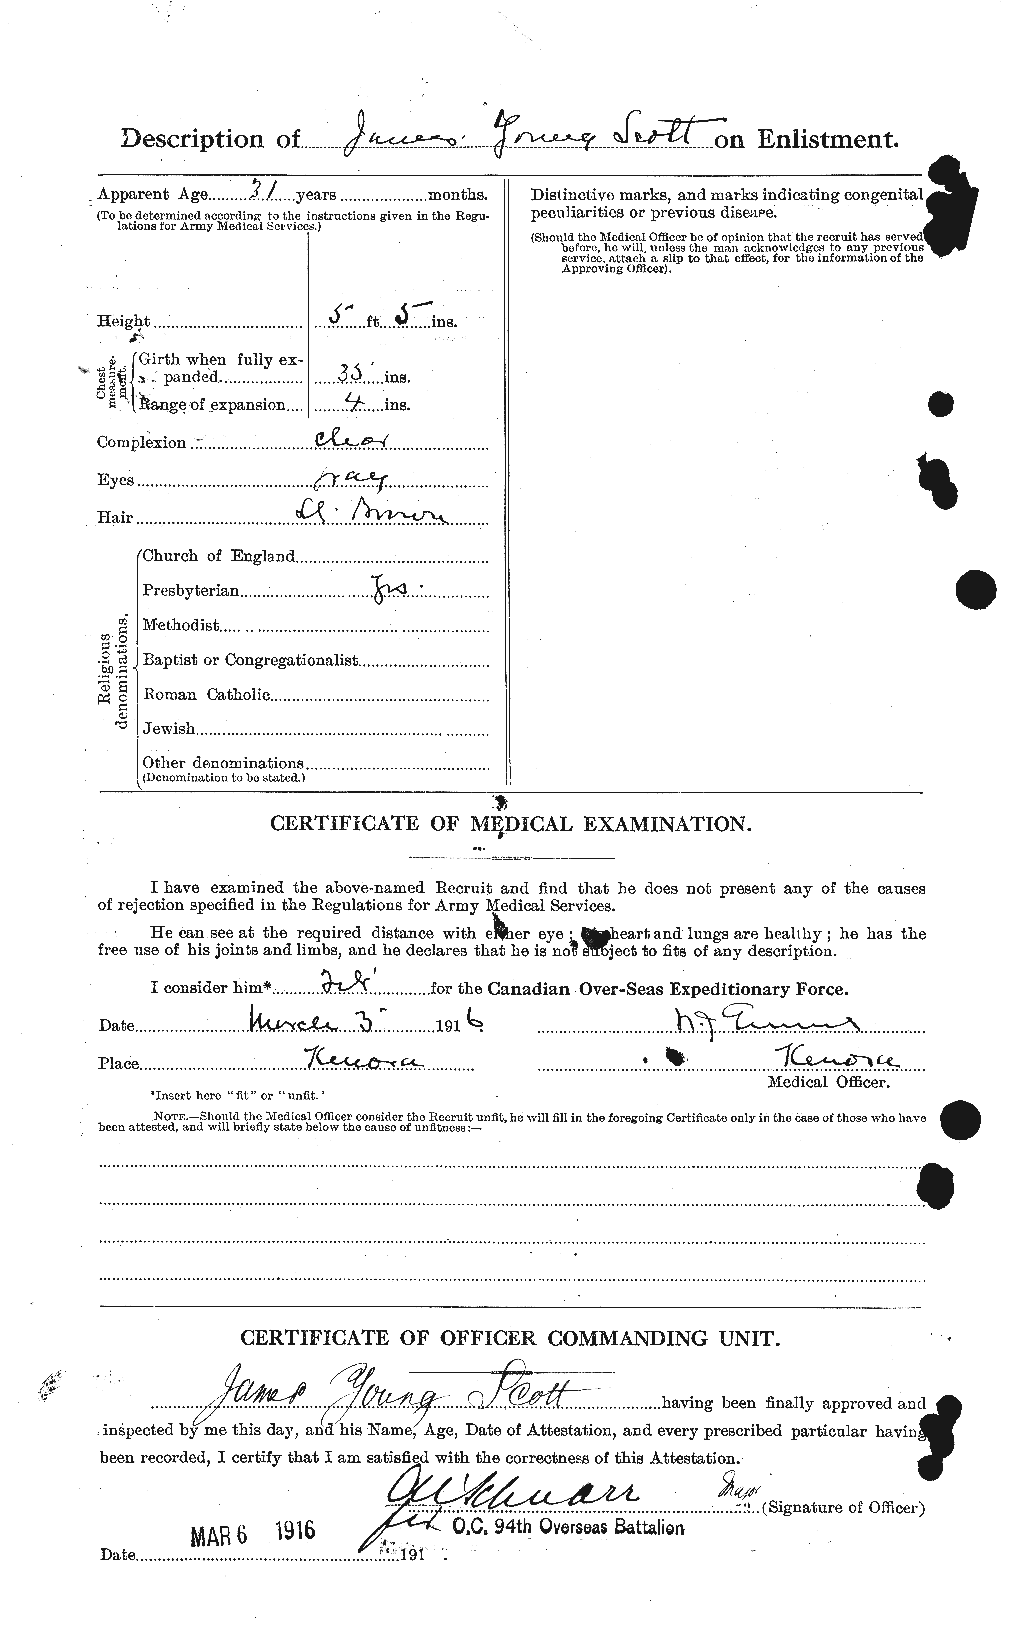 Personnel Records of the First World War - CEF 085165b